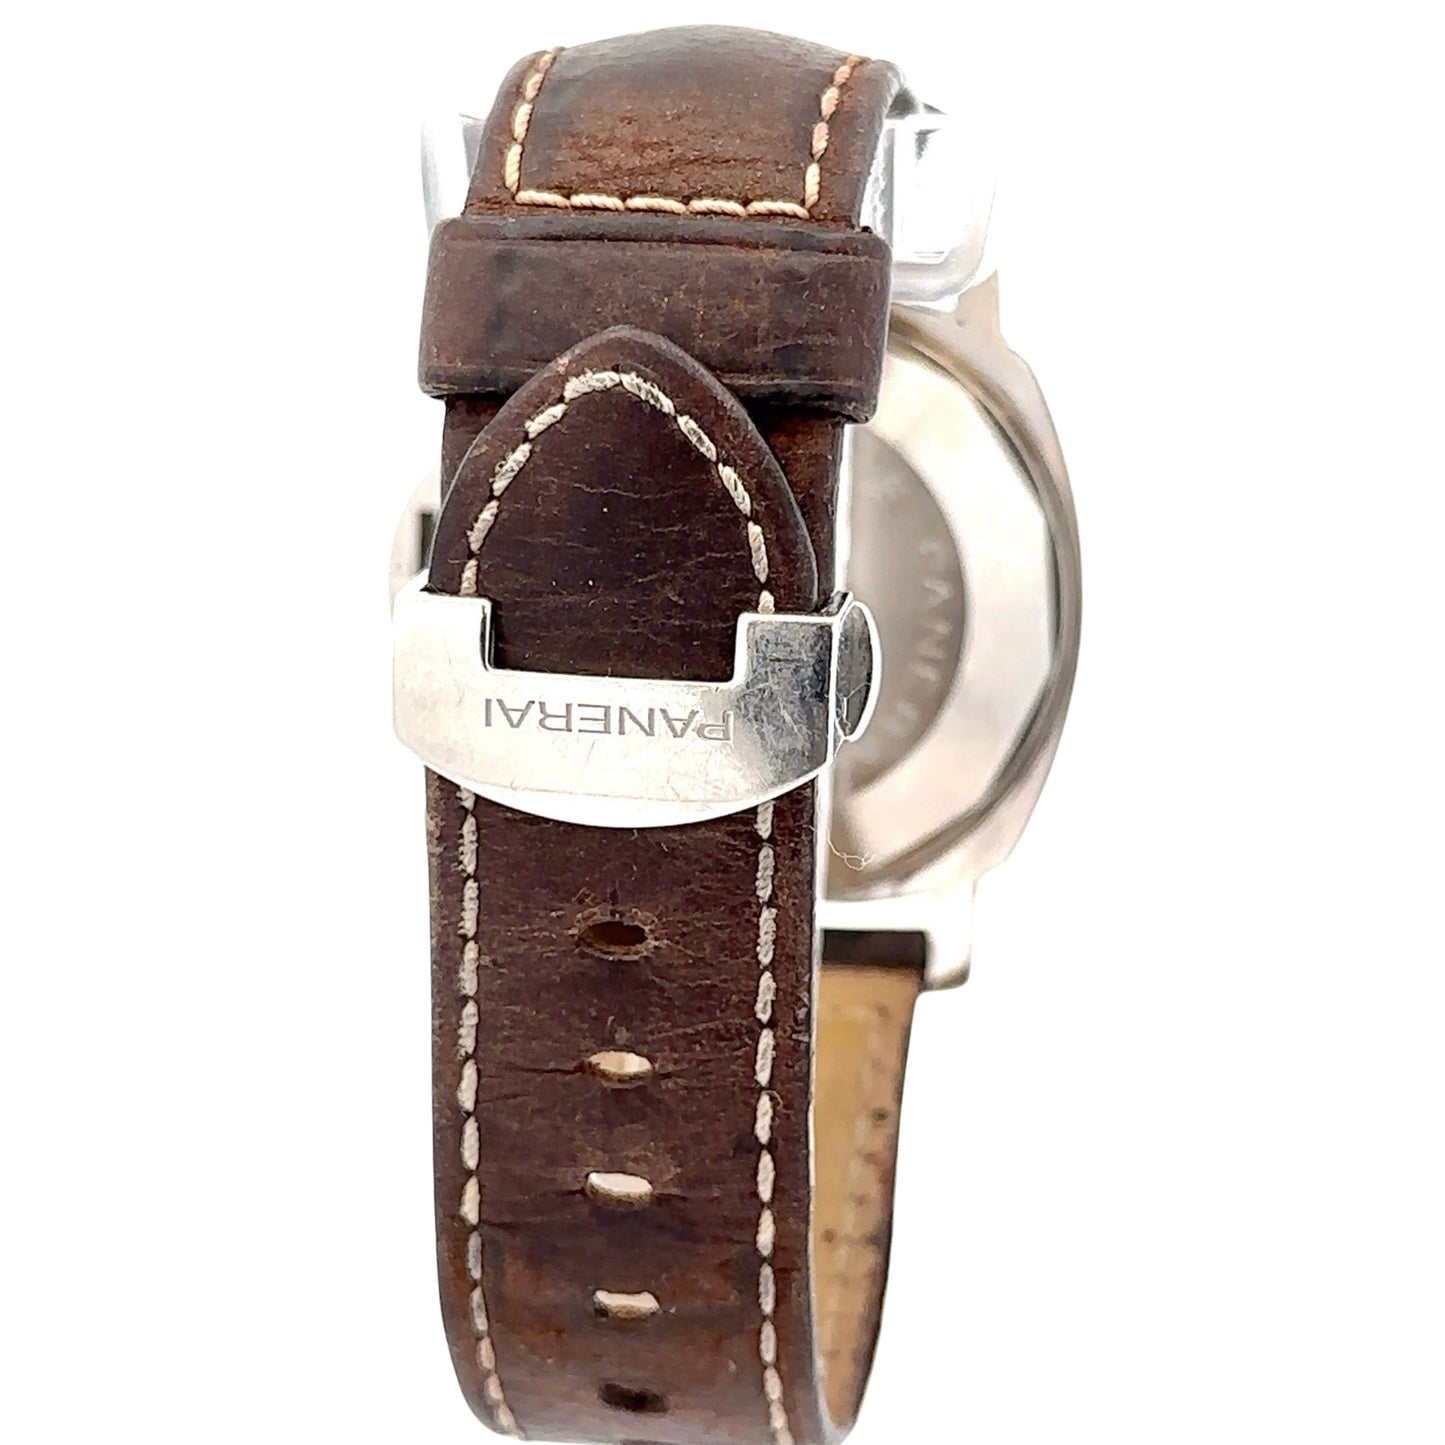 Panerai steel clasp with scratches and brown leather band with wear